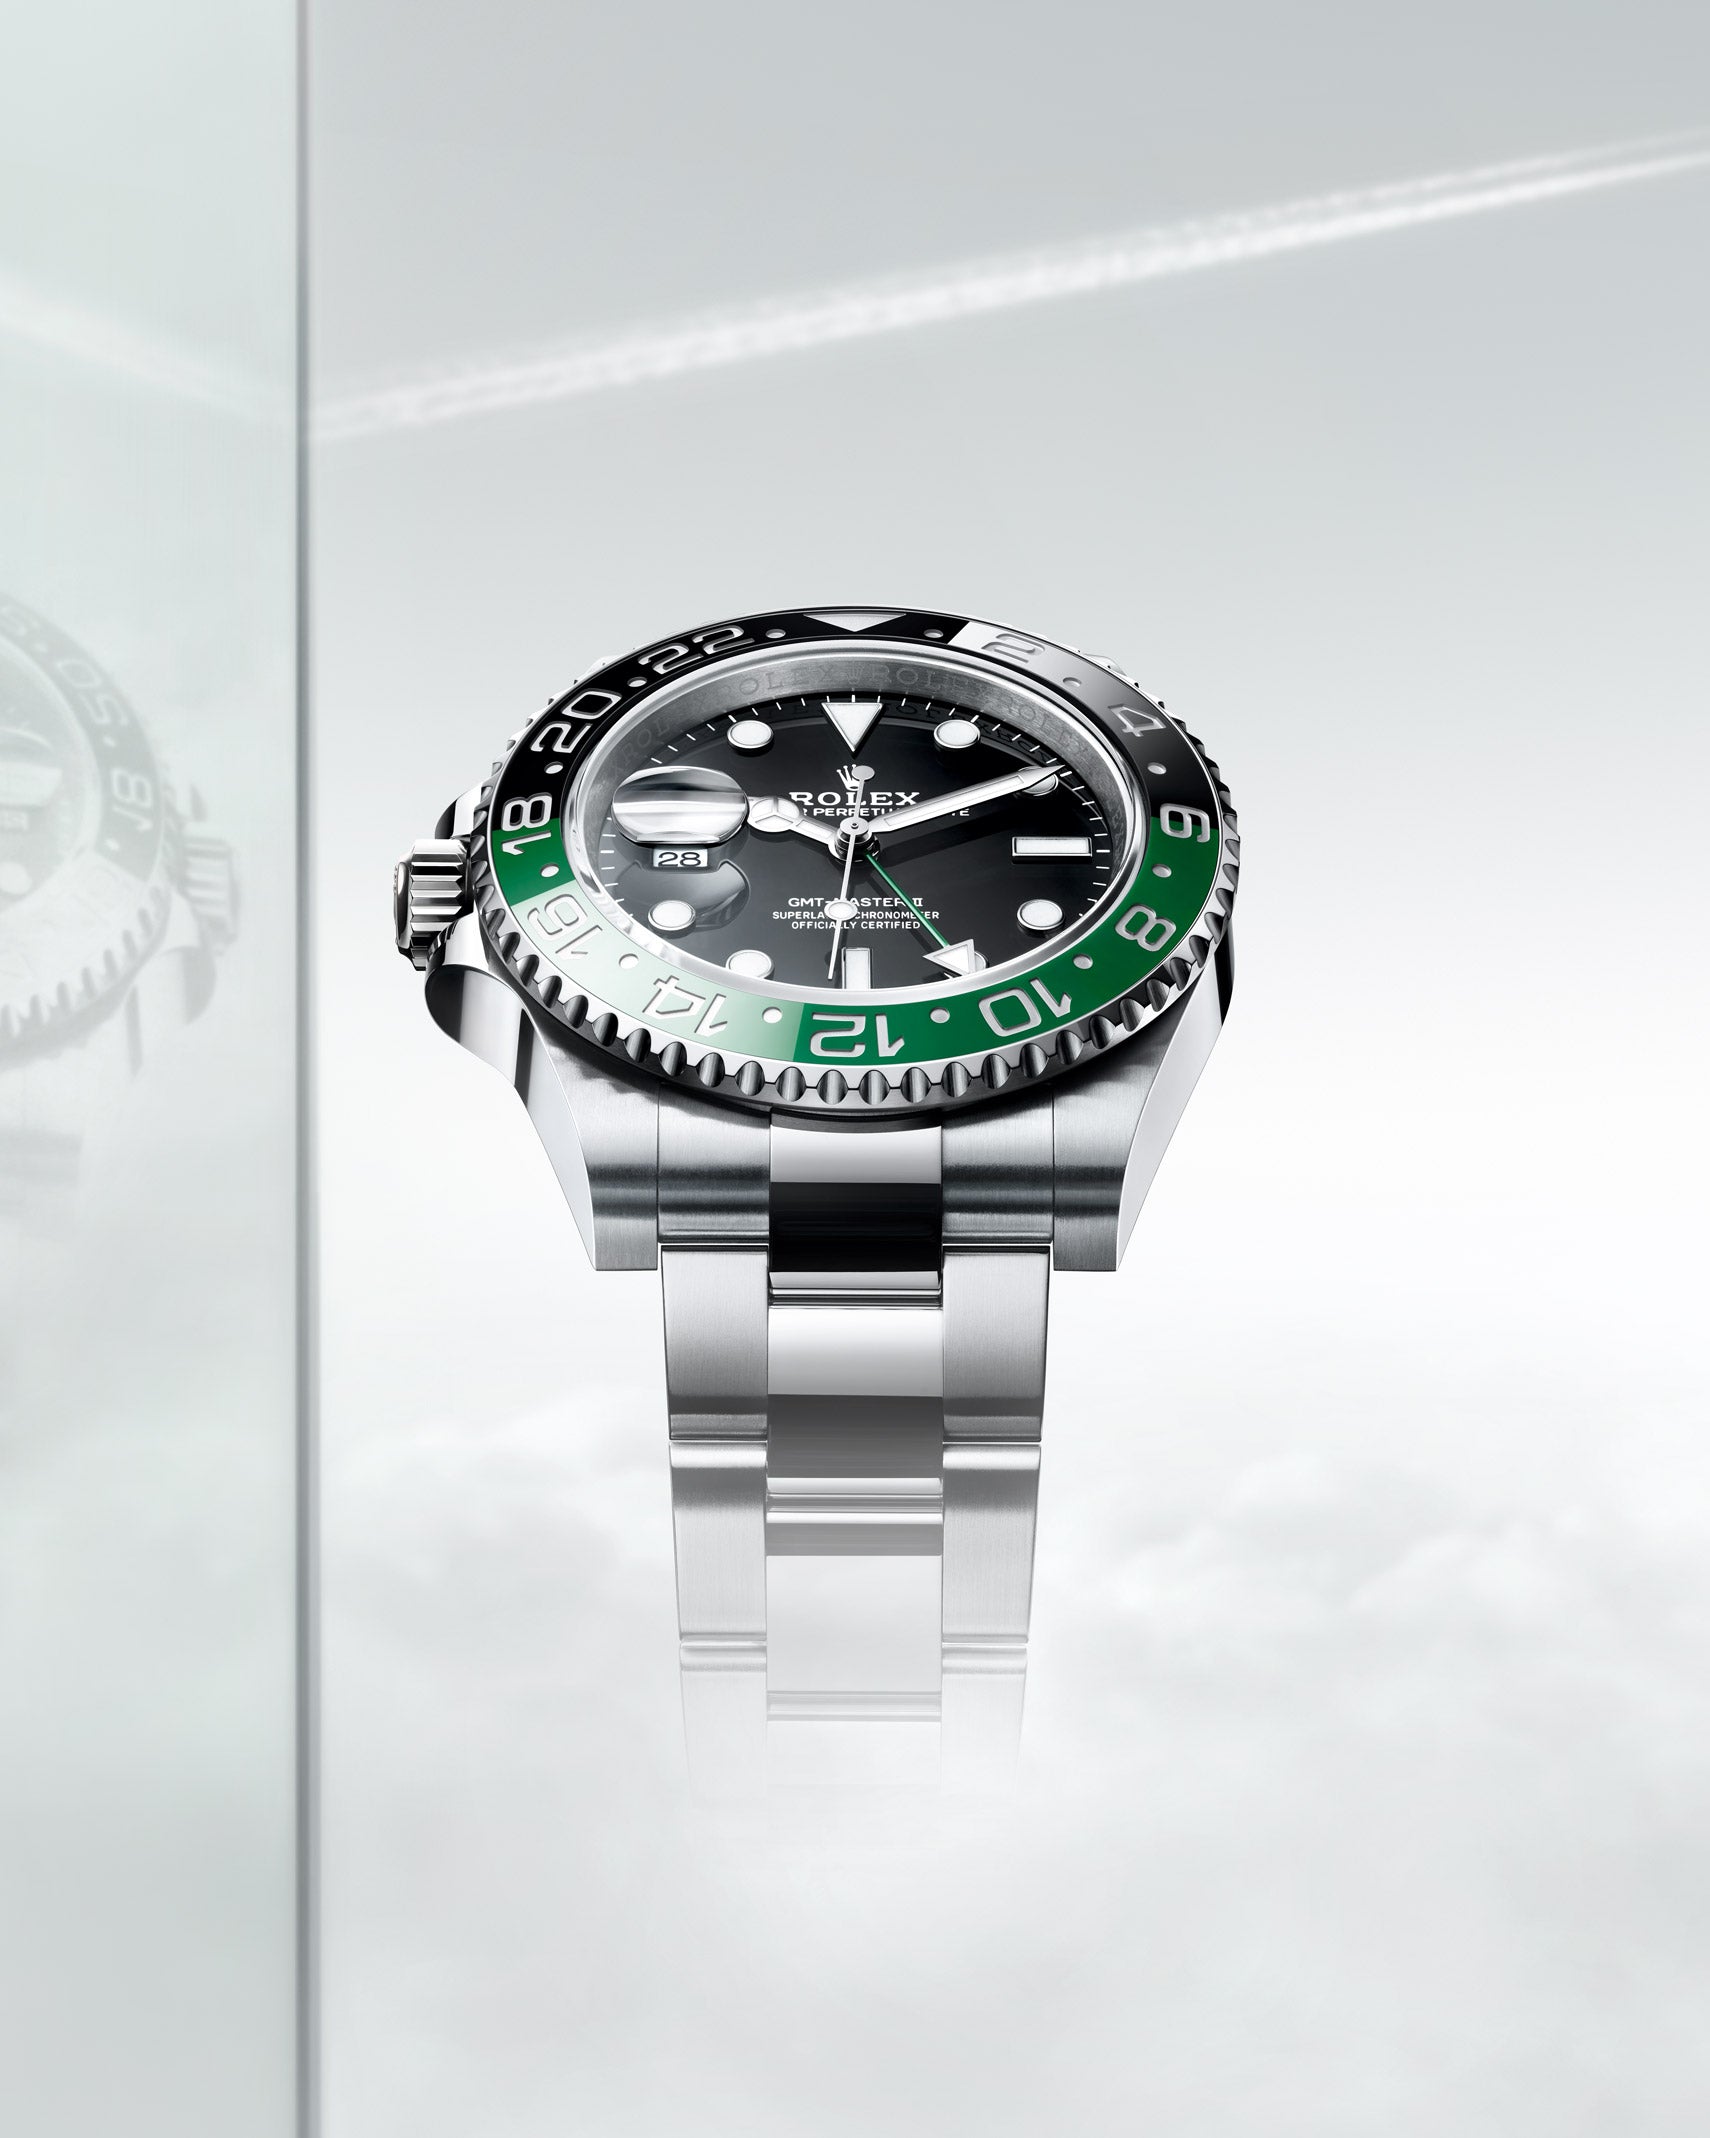 Rolex Oyster Perpetual GMT-Master II in Clouds at Fink's Jewelers